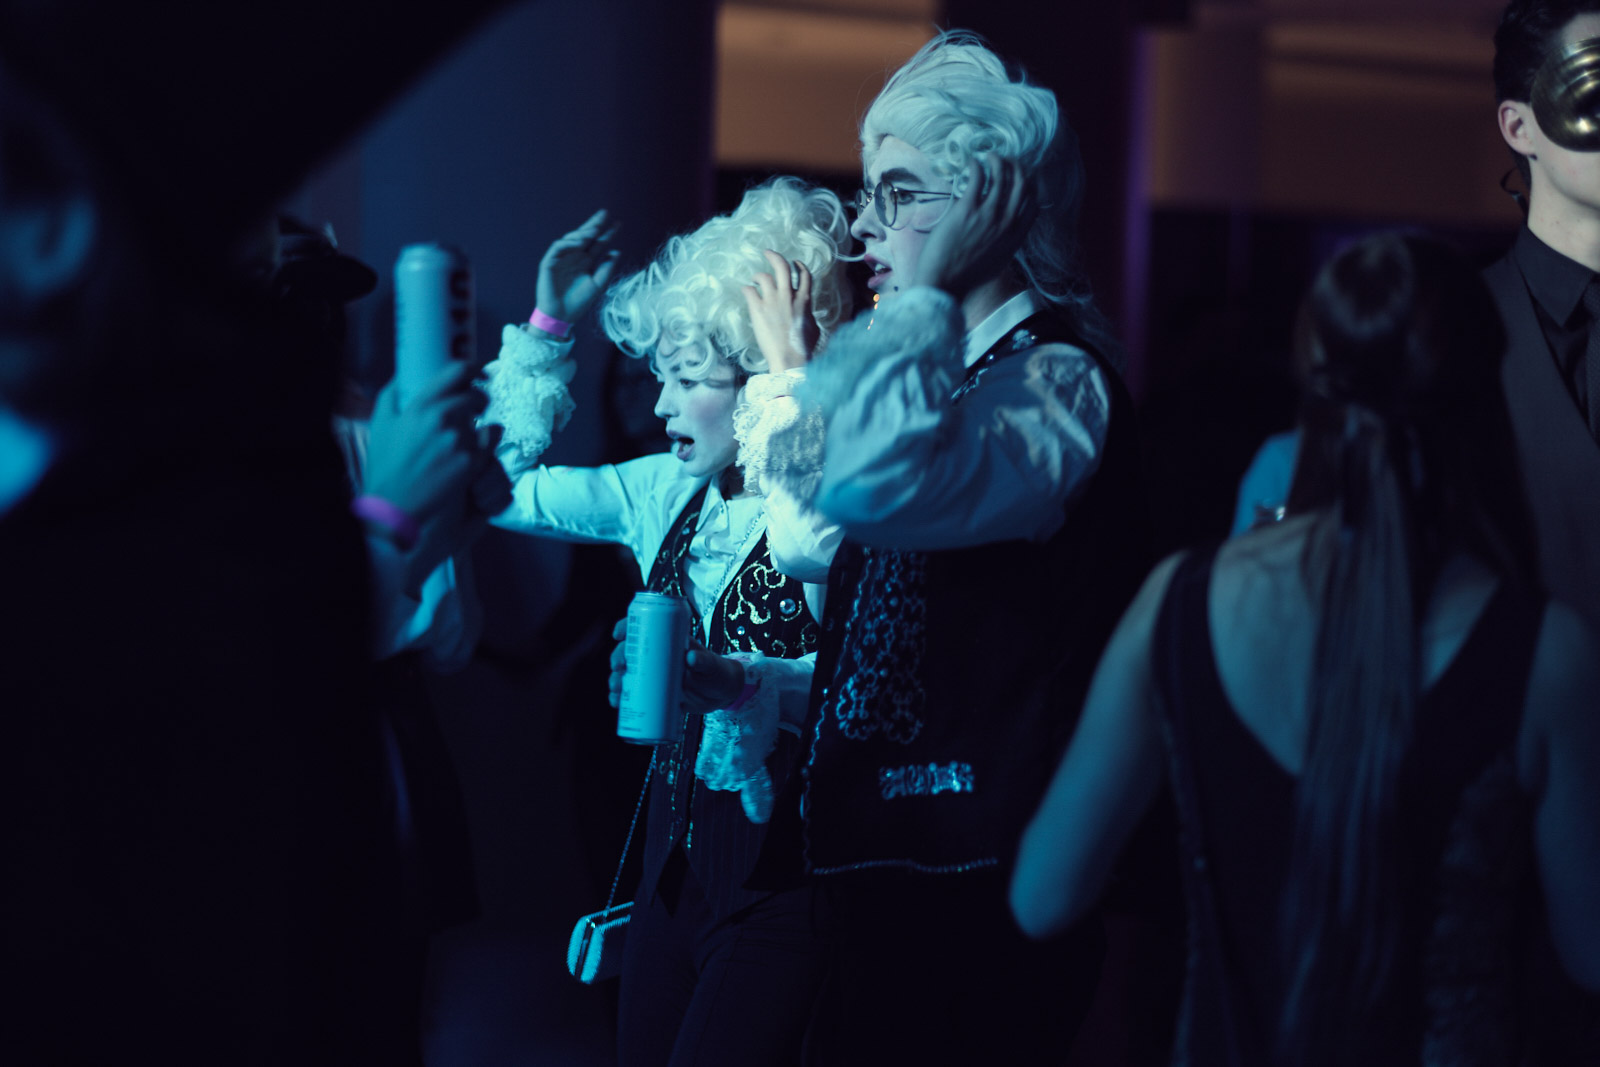 Two people dressed in wigs and costumes at the 2019 GALA